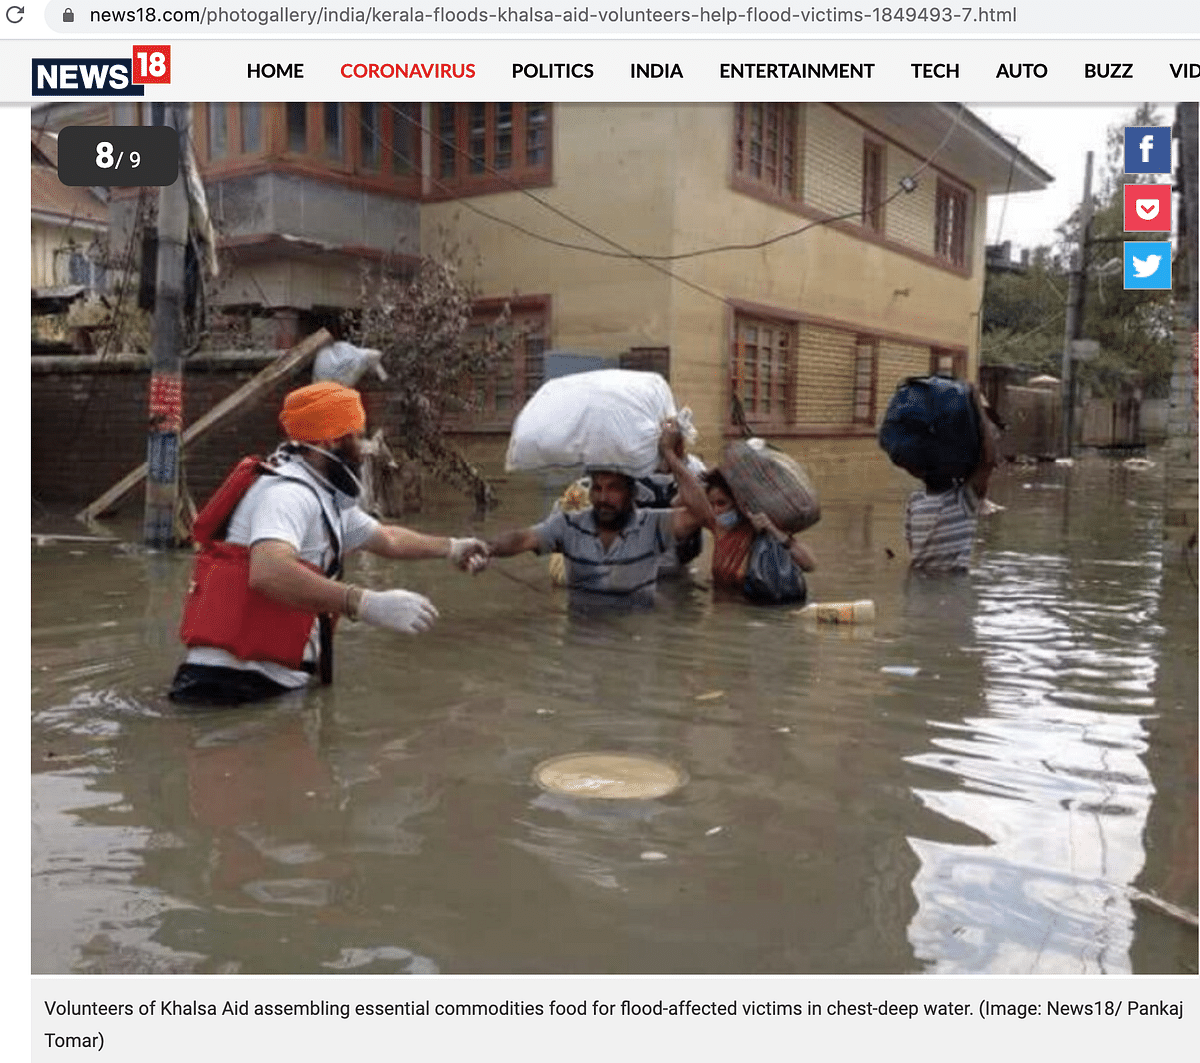 The circulating  images are old and show Khalsa Aid providing relief material in Bihar and Jammu and Kashmir.